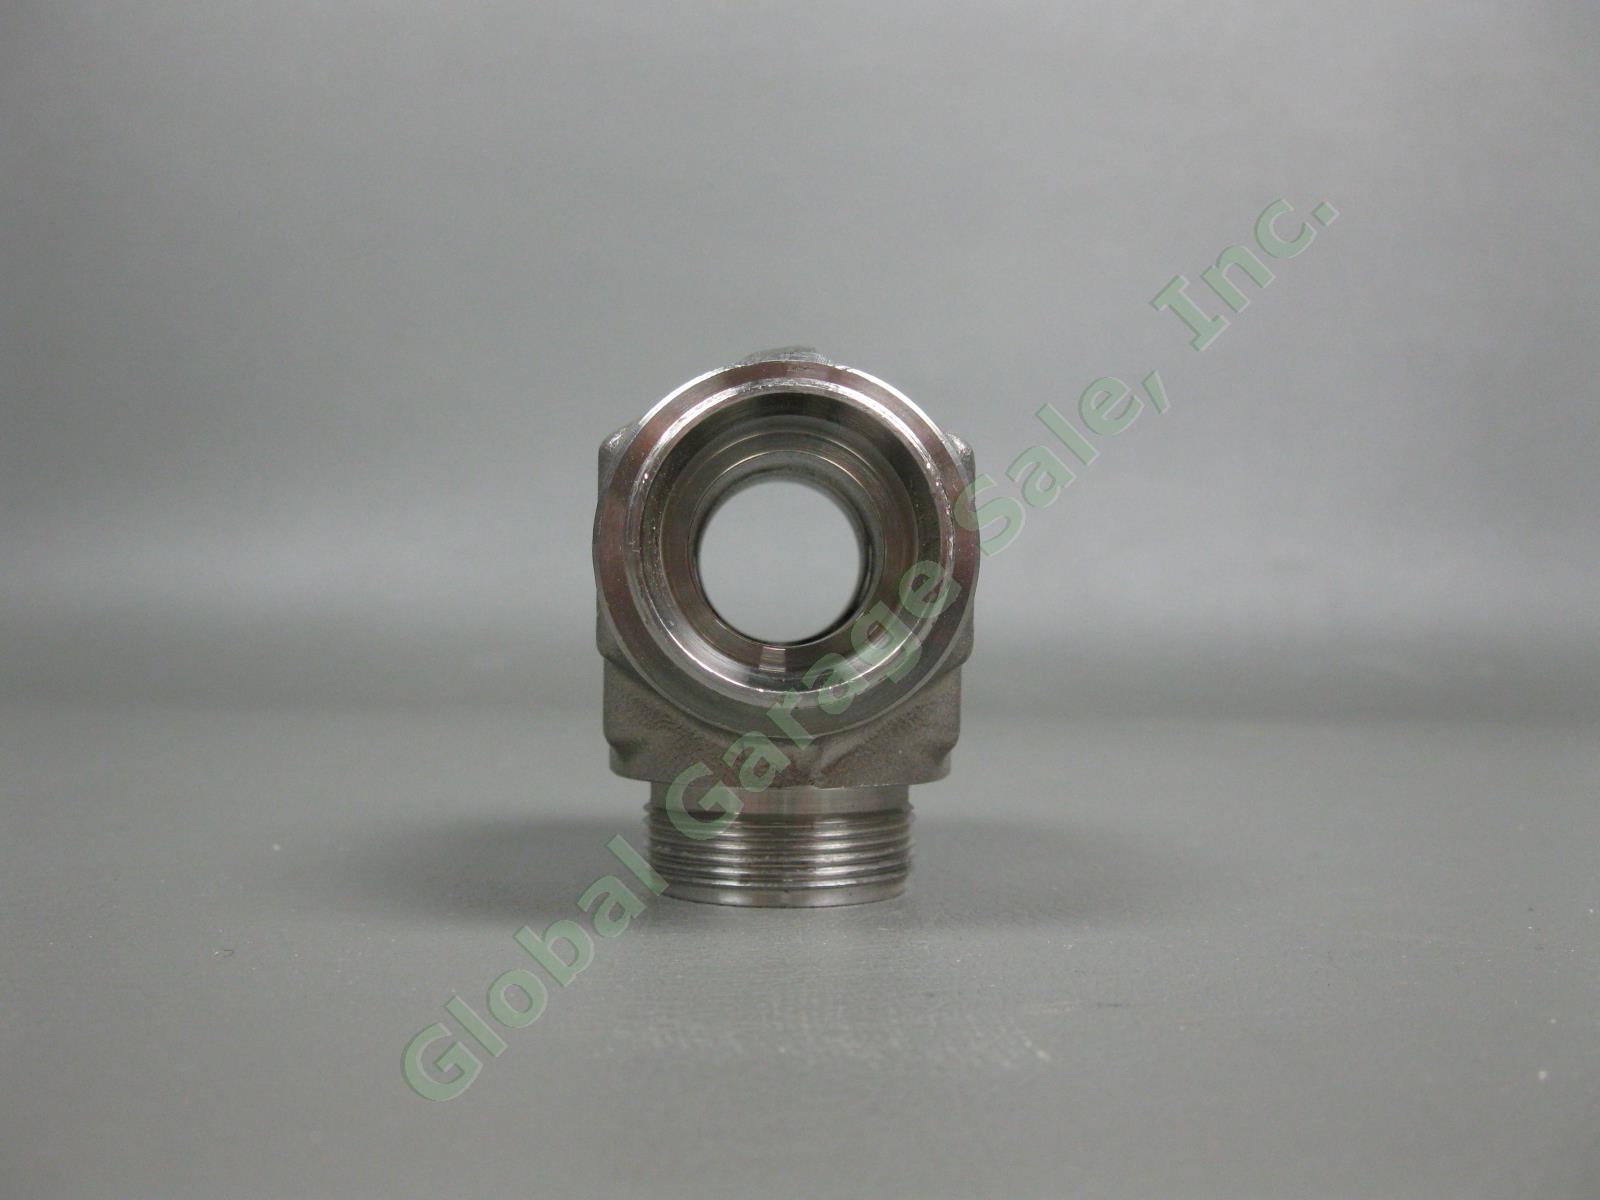 6 Swagelok 7/8" OD SS 314 Compression Tube Fitting Union Tee Nut Less Ferrules 8